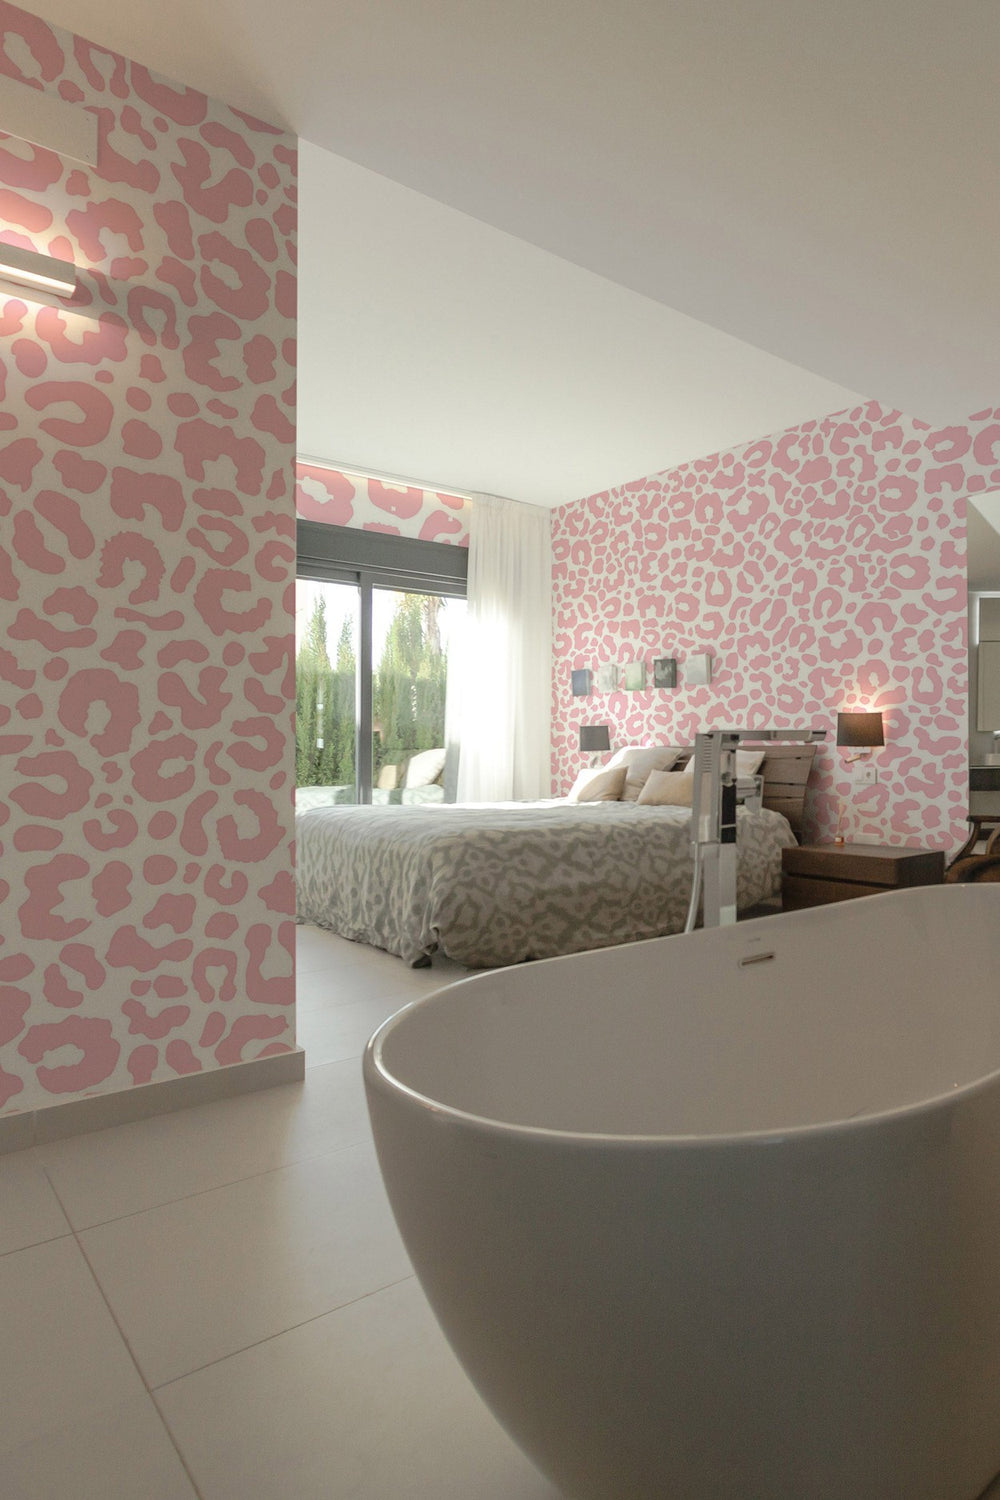 Stylish bedroom interior with pink animal print wall mural and a freestanding bathtub